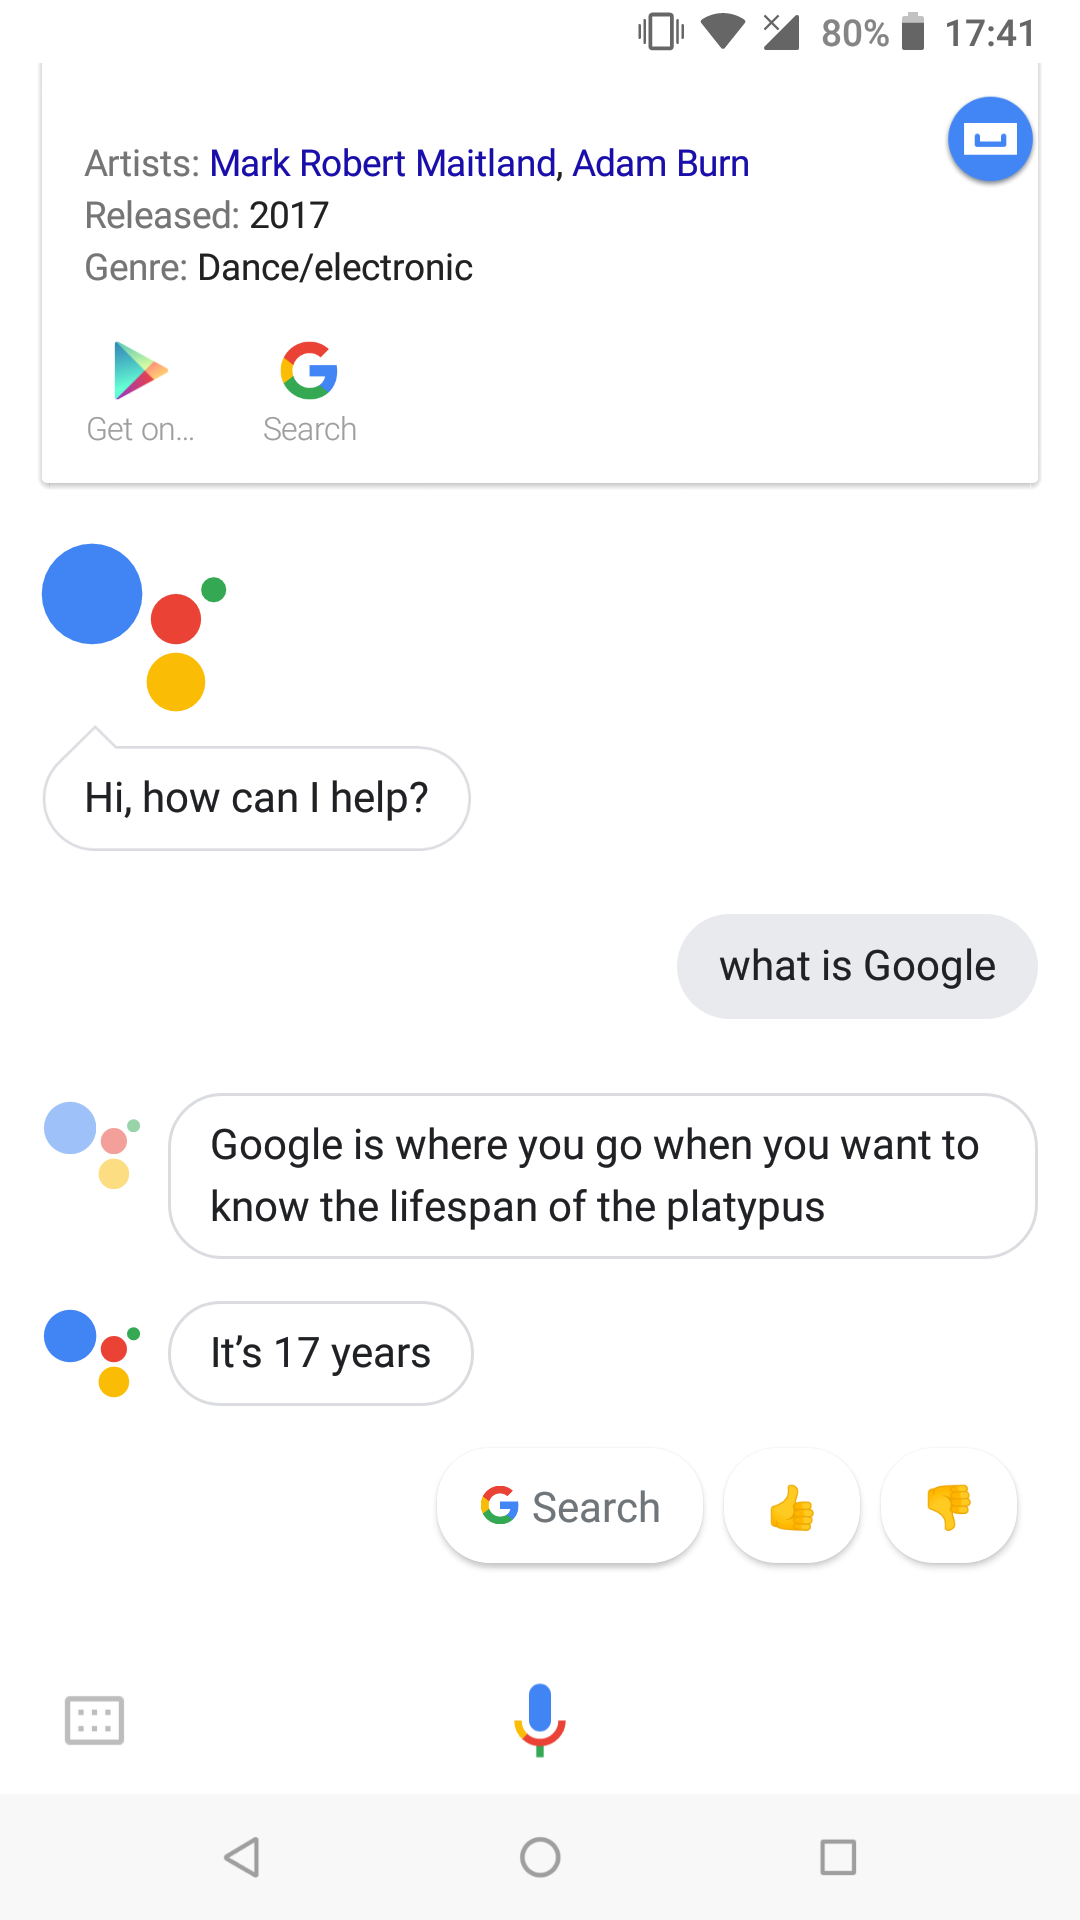 Only Google knows what Google is...